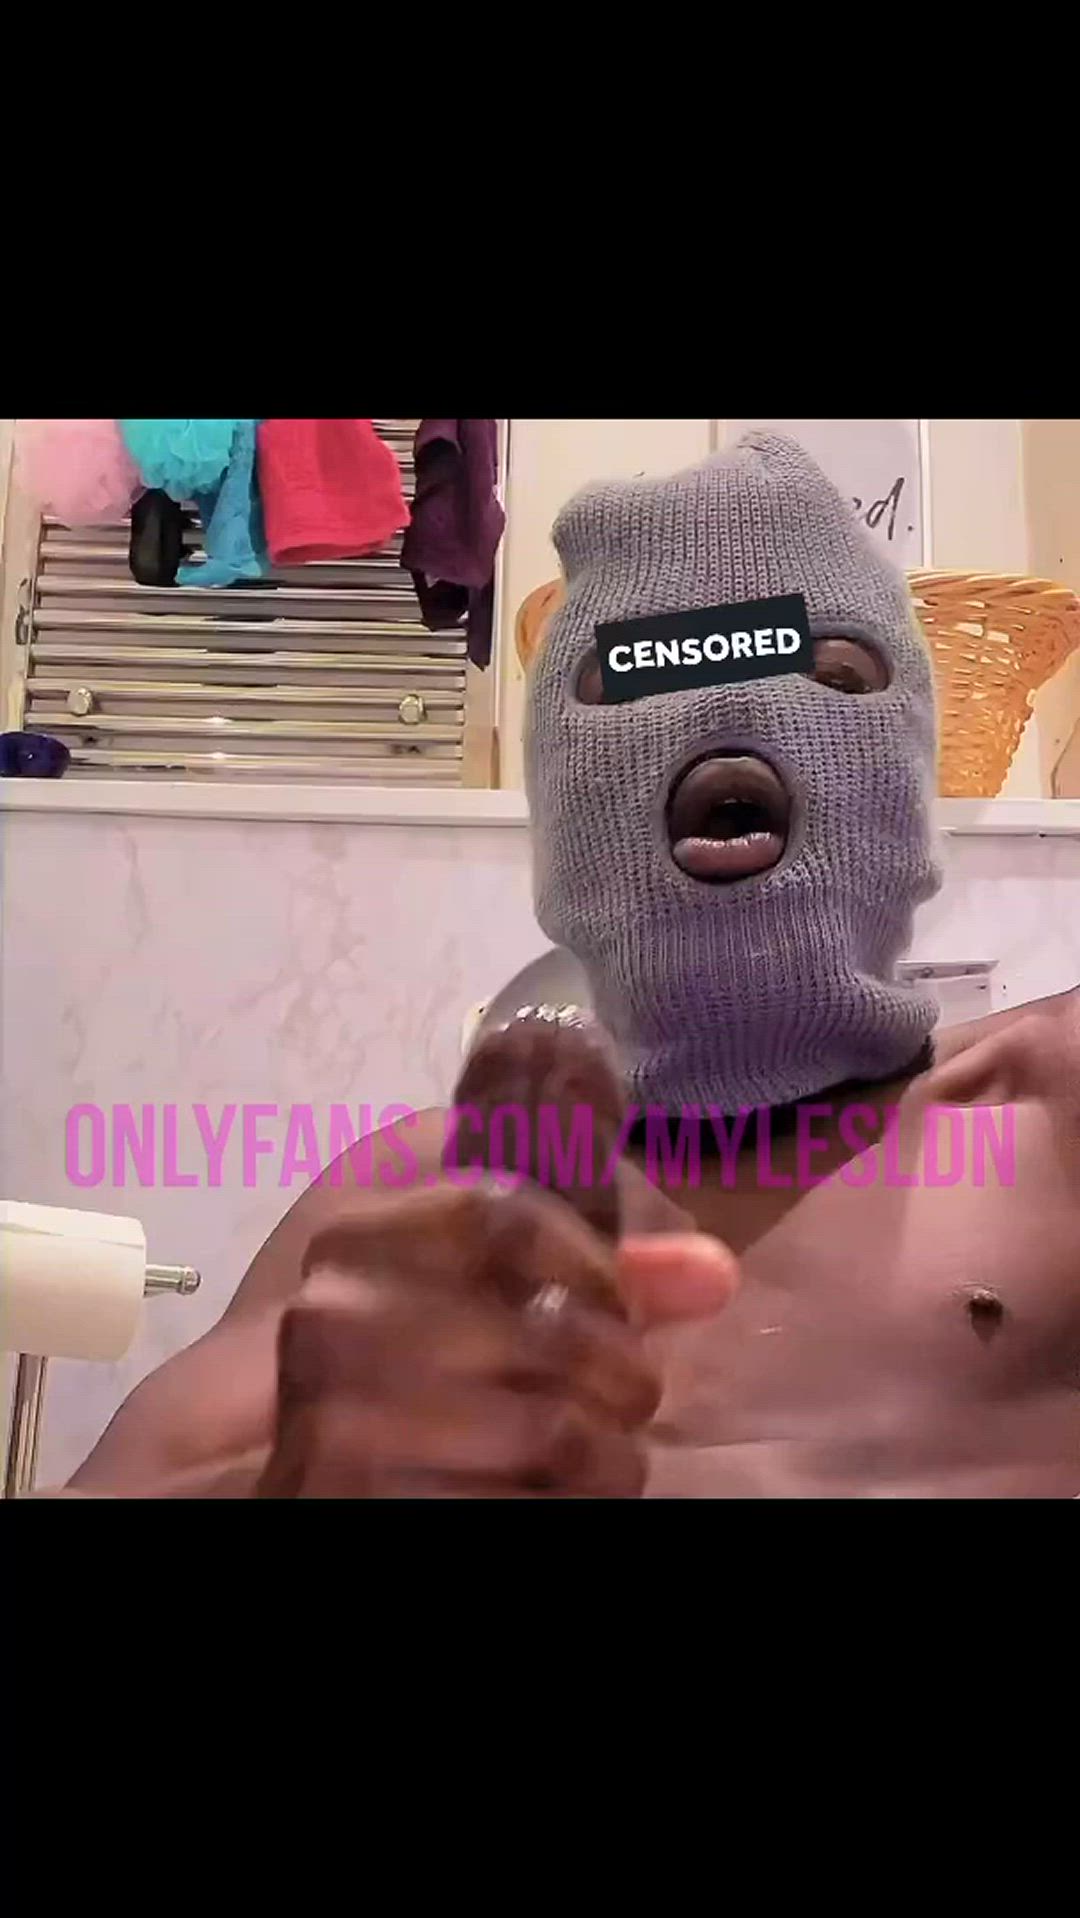 Cock porn video with onlyfans model Onlyfans.com/Mylesldn <strong>@mylesldn</strong>